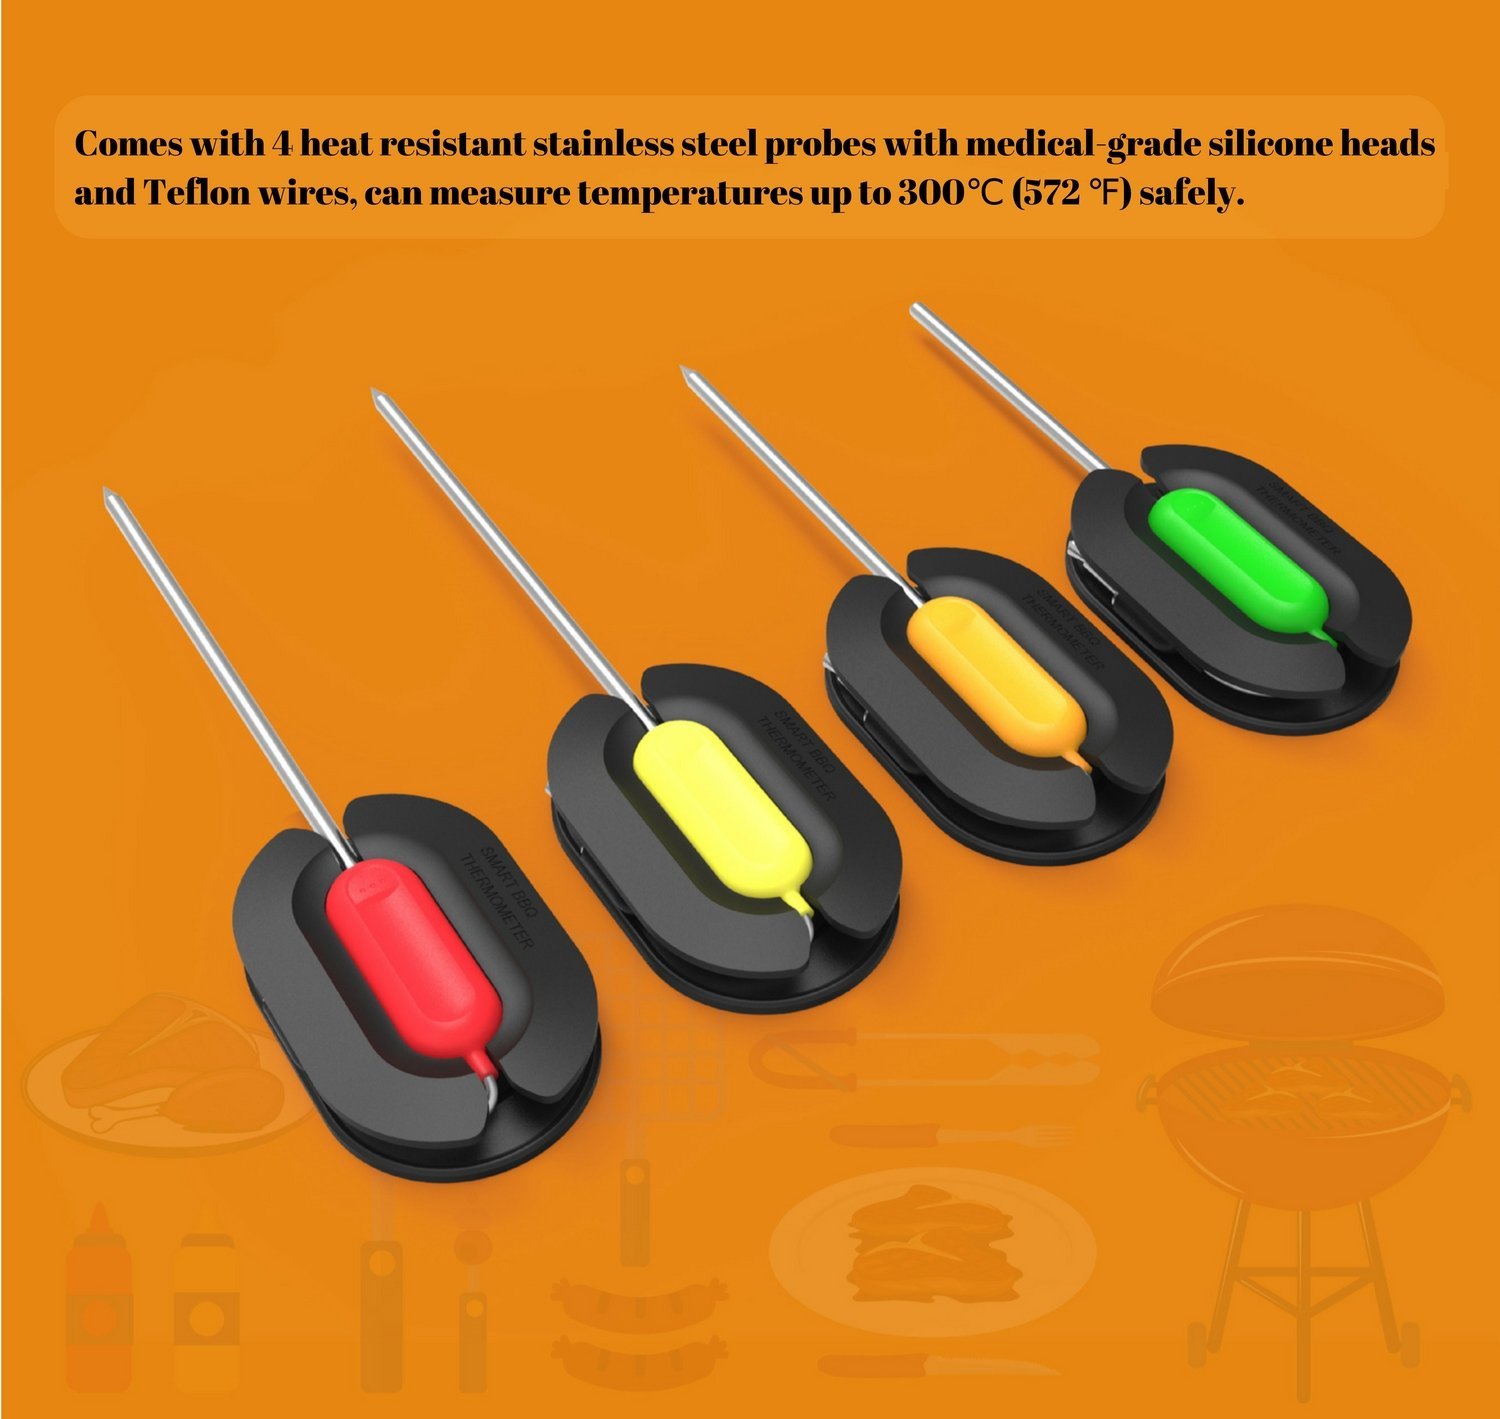 Bluetooth Wireless Remote Digital Thermometer for Oven Kitchen Smoker BBQ, iPhone & Android Phone, 4 Probes - 副本